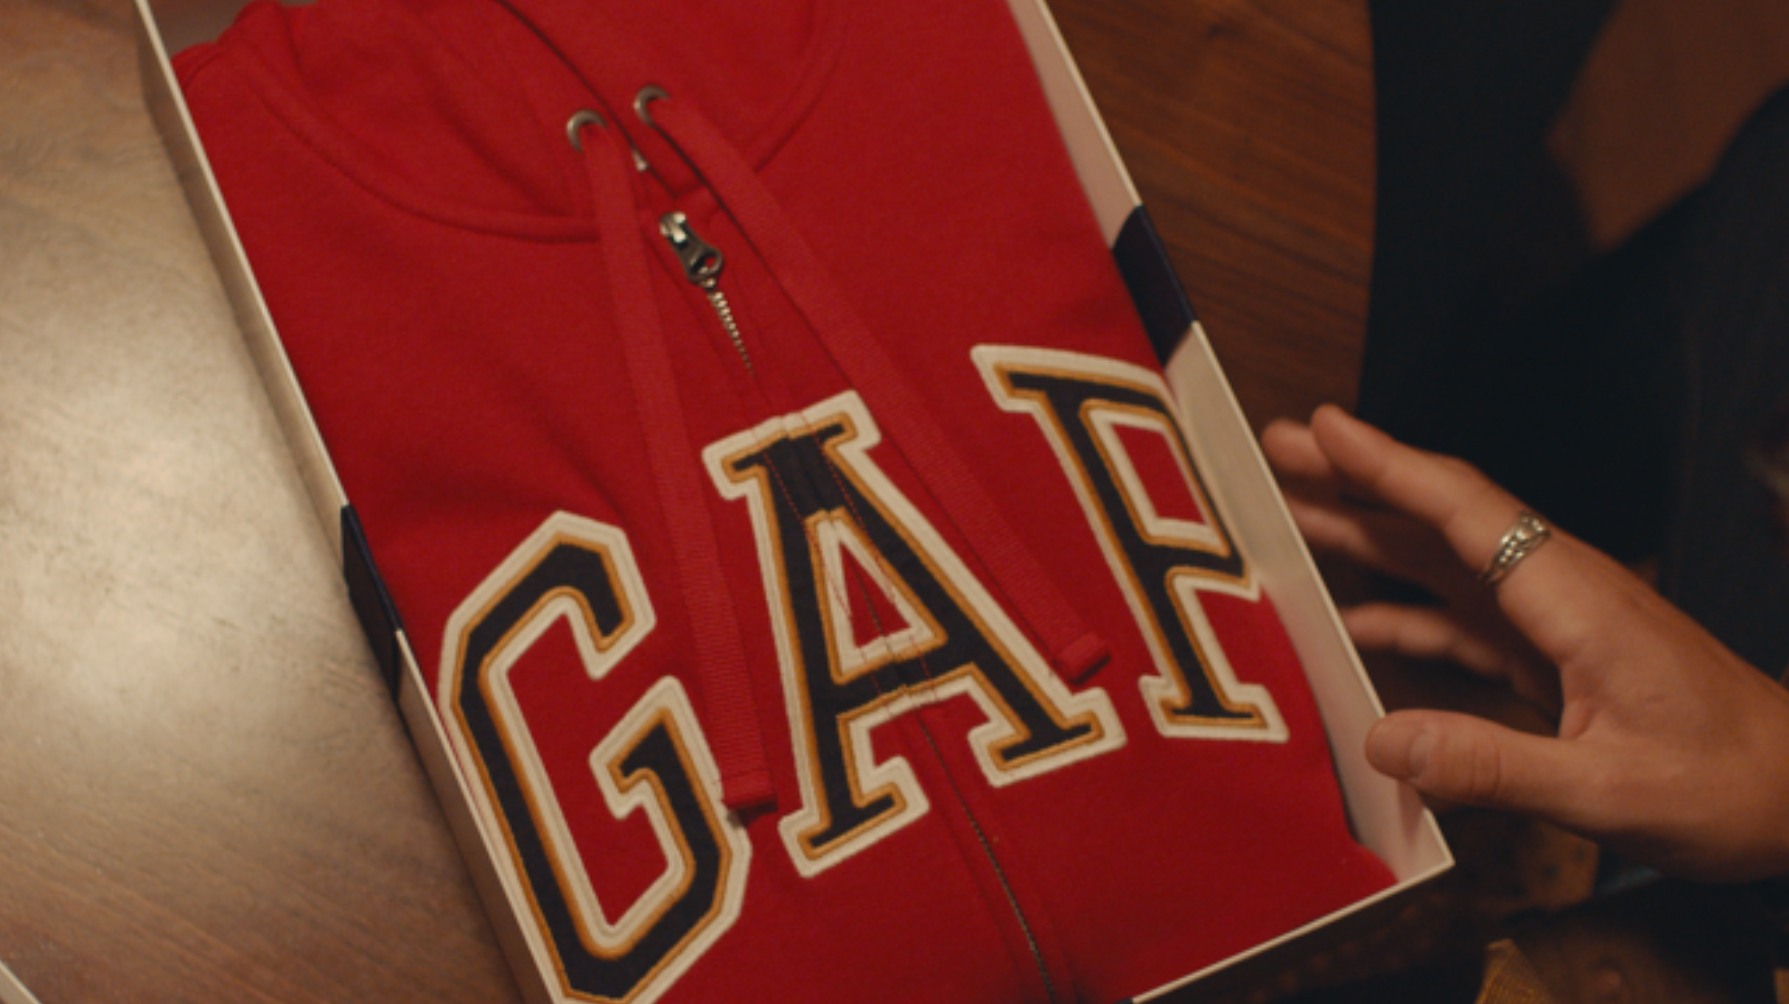 Gap Launches "Gift the Thought" Holiday Platform